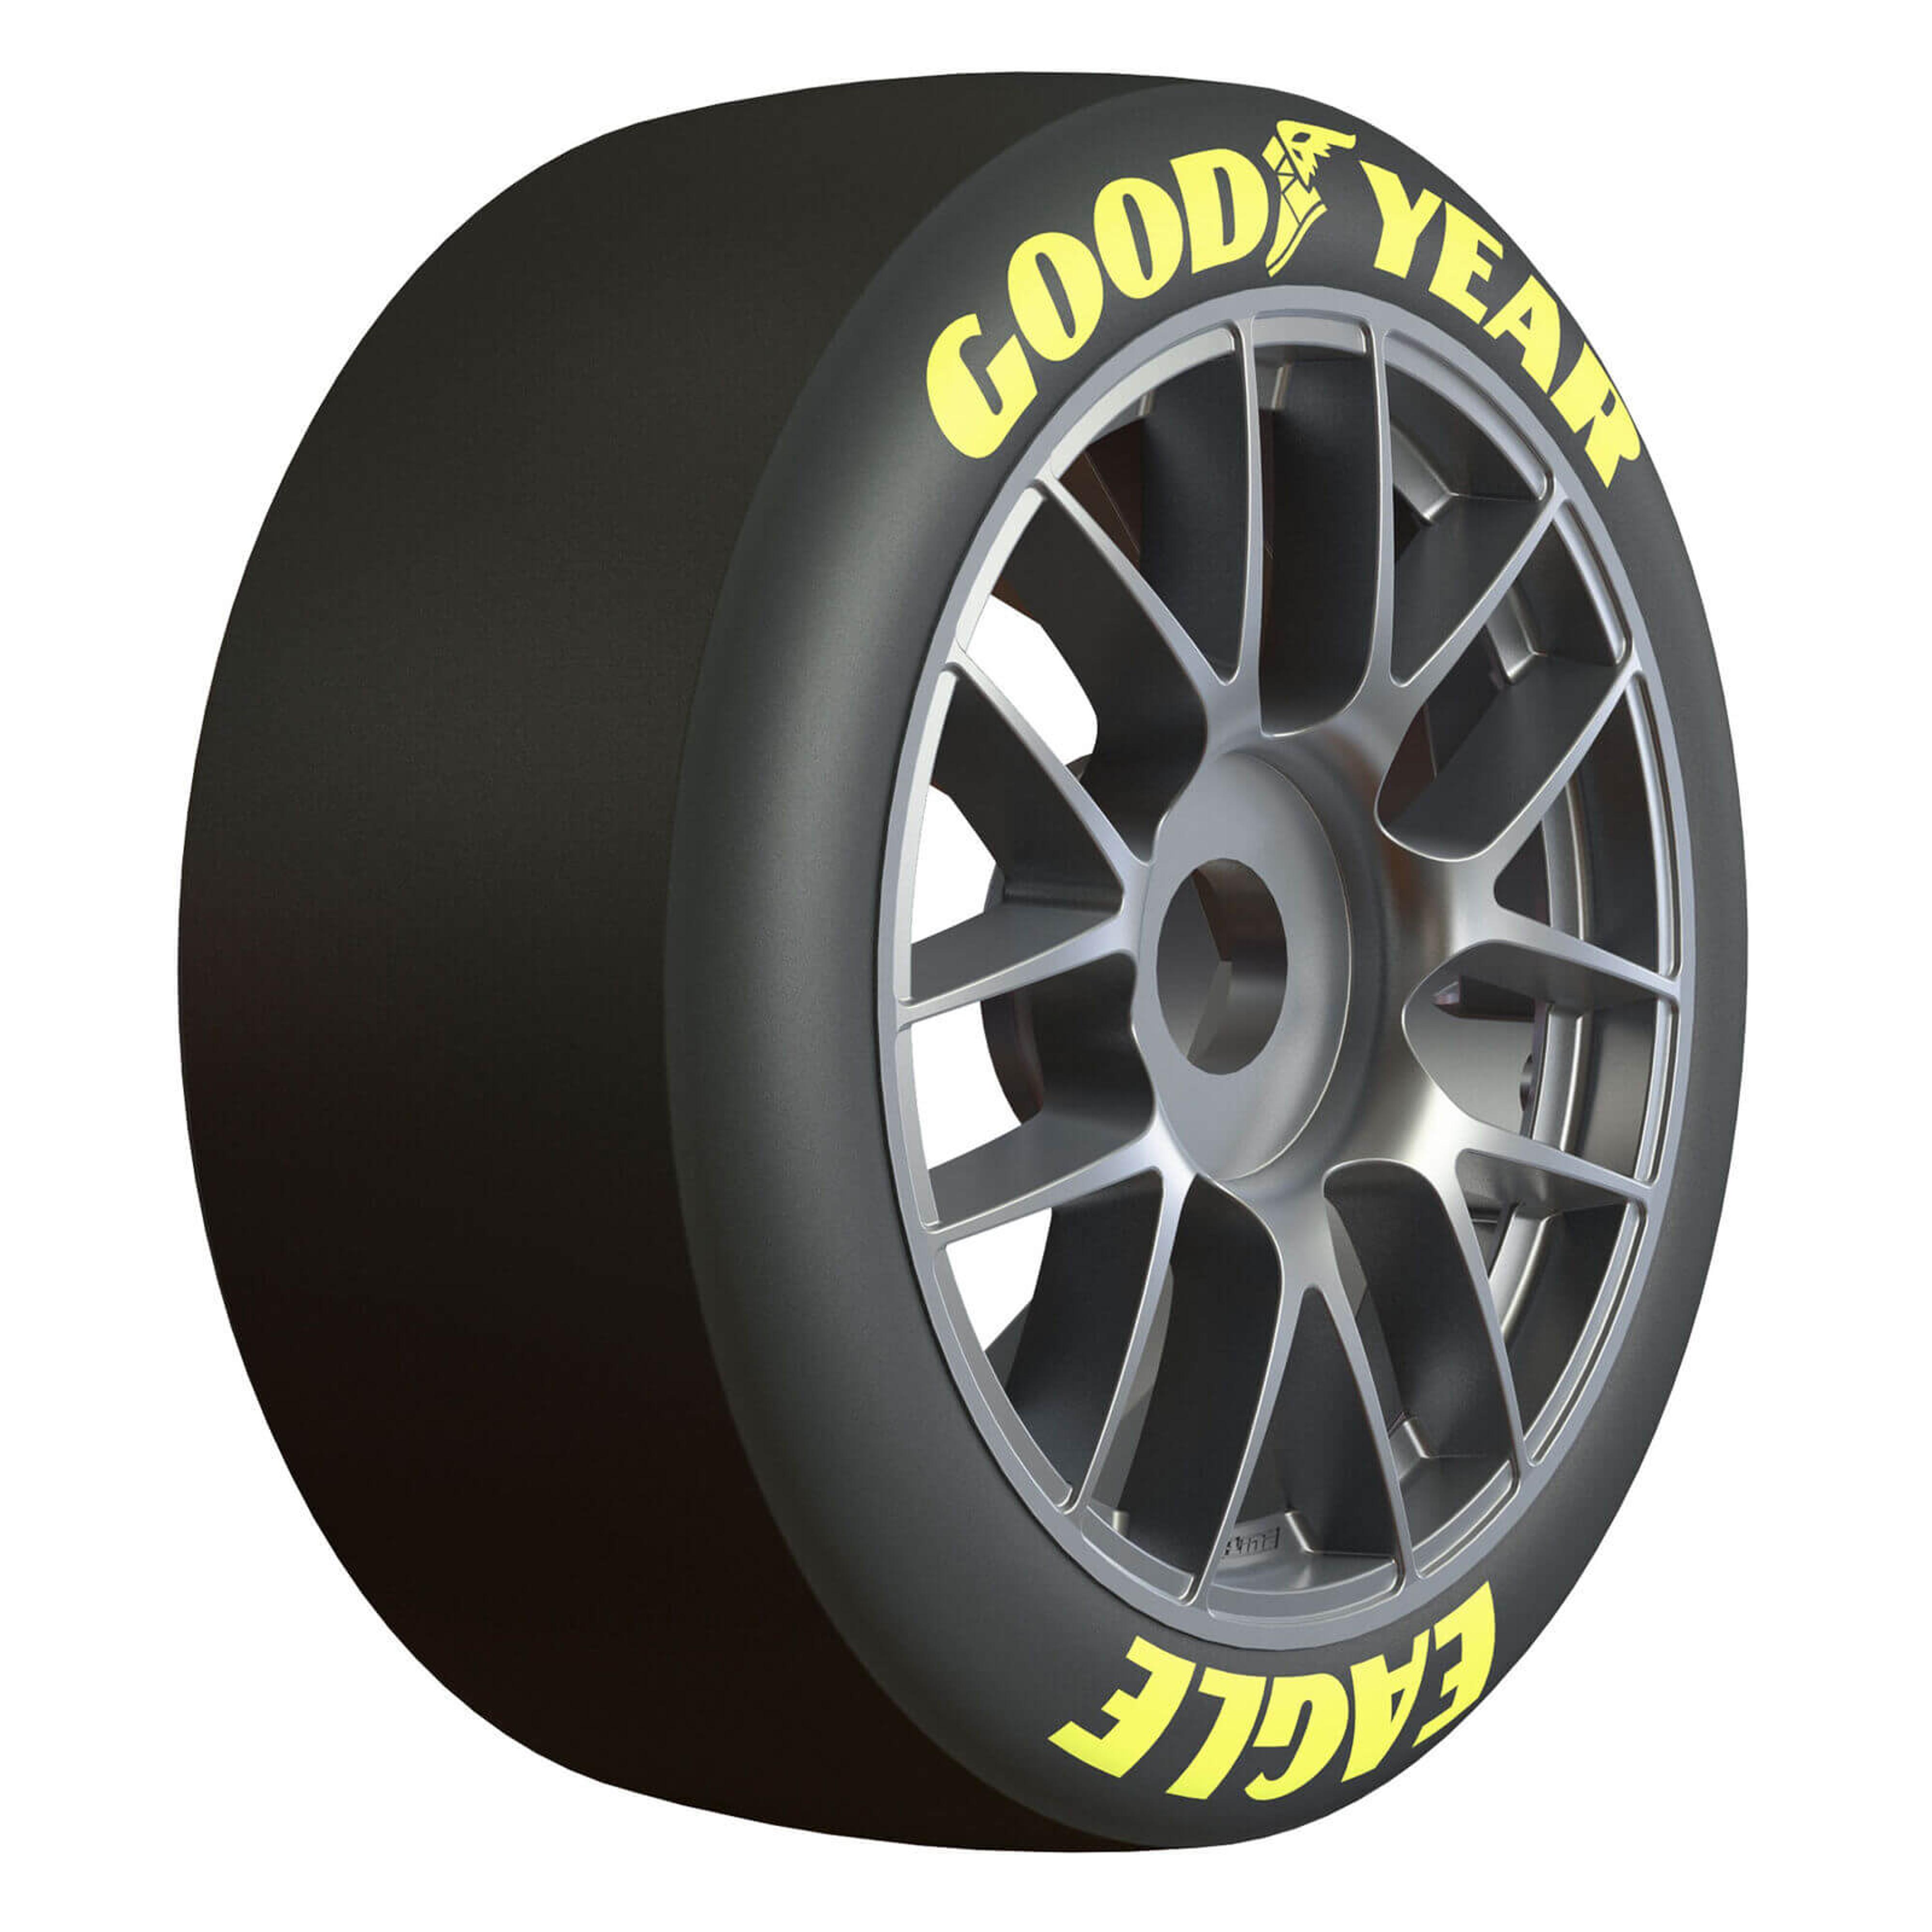 Goodyear NASCAR Cup Fr/Rr Belted MTD 17mm (1 Pair)